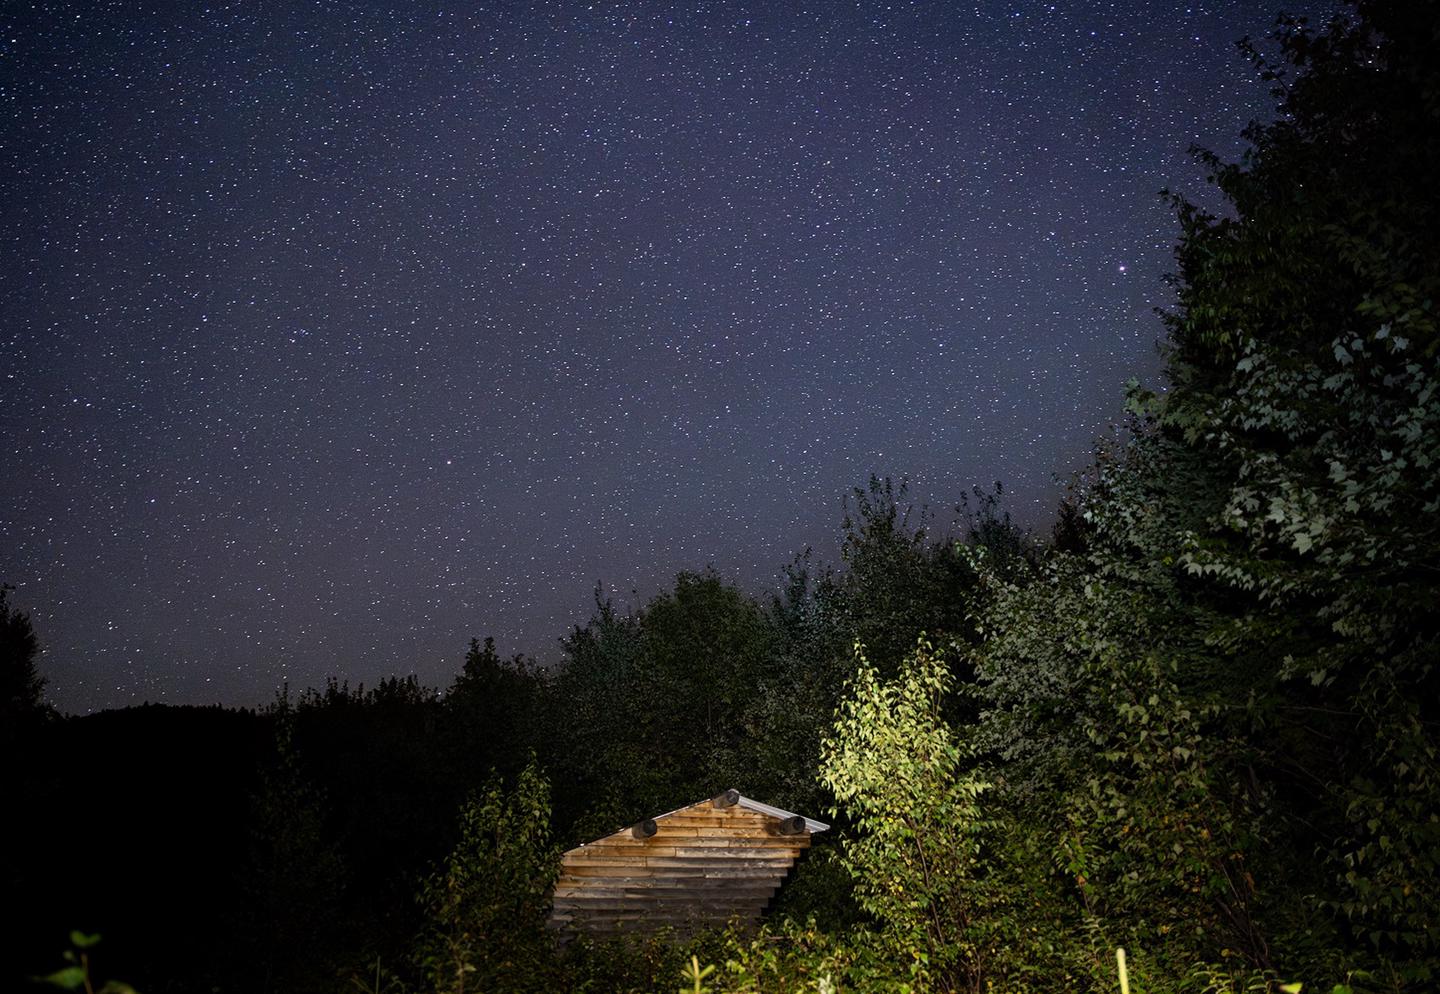 An expansive dark night sky with many stars above a small wooden structure. The silhouette of the forest surrounds the wooden structure.Lunksoos Lean-to is a wonderful location to stargaze and enjoy the night sky.